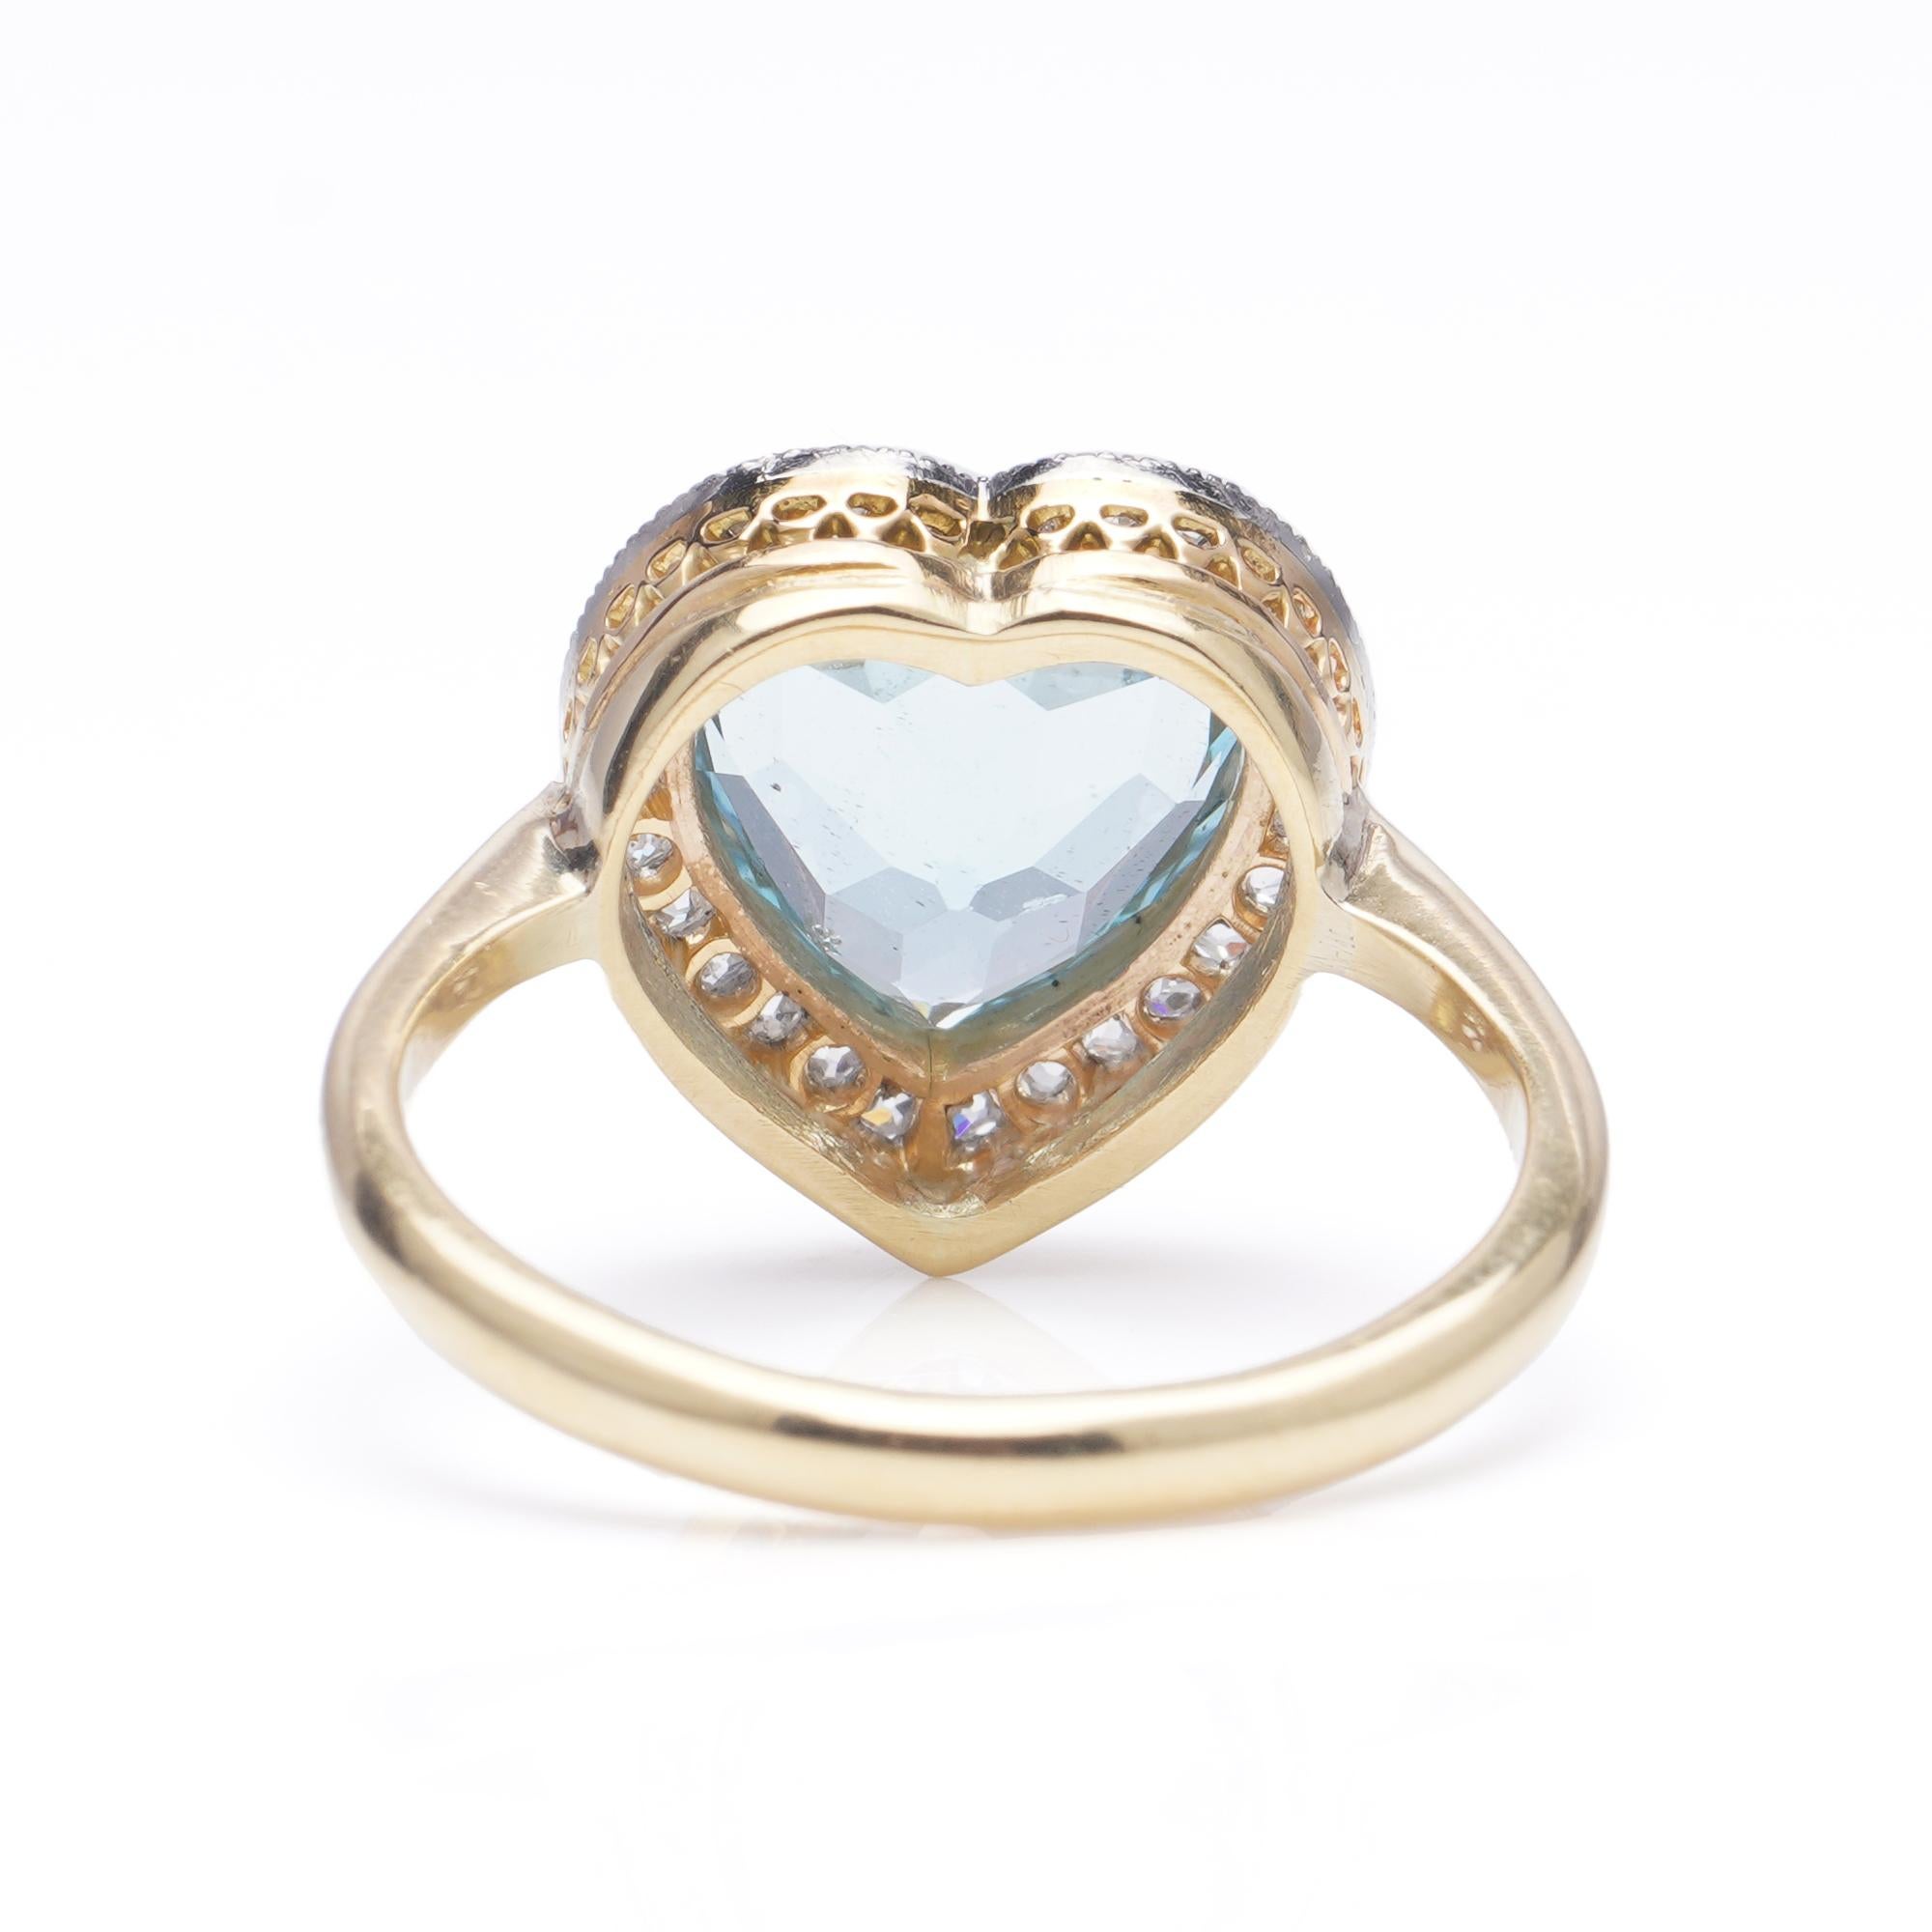 Vintage 18kt Yellow Gold Ladies Ring with Heart Cut 6.00 Ct. Aquamarine For Sale 1